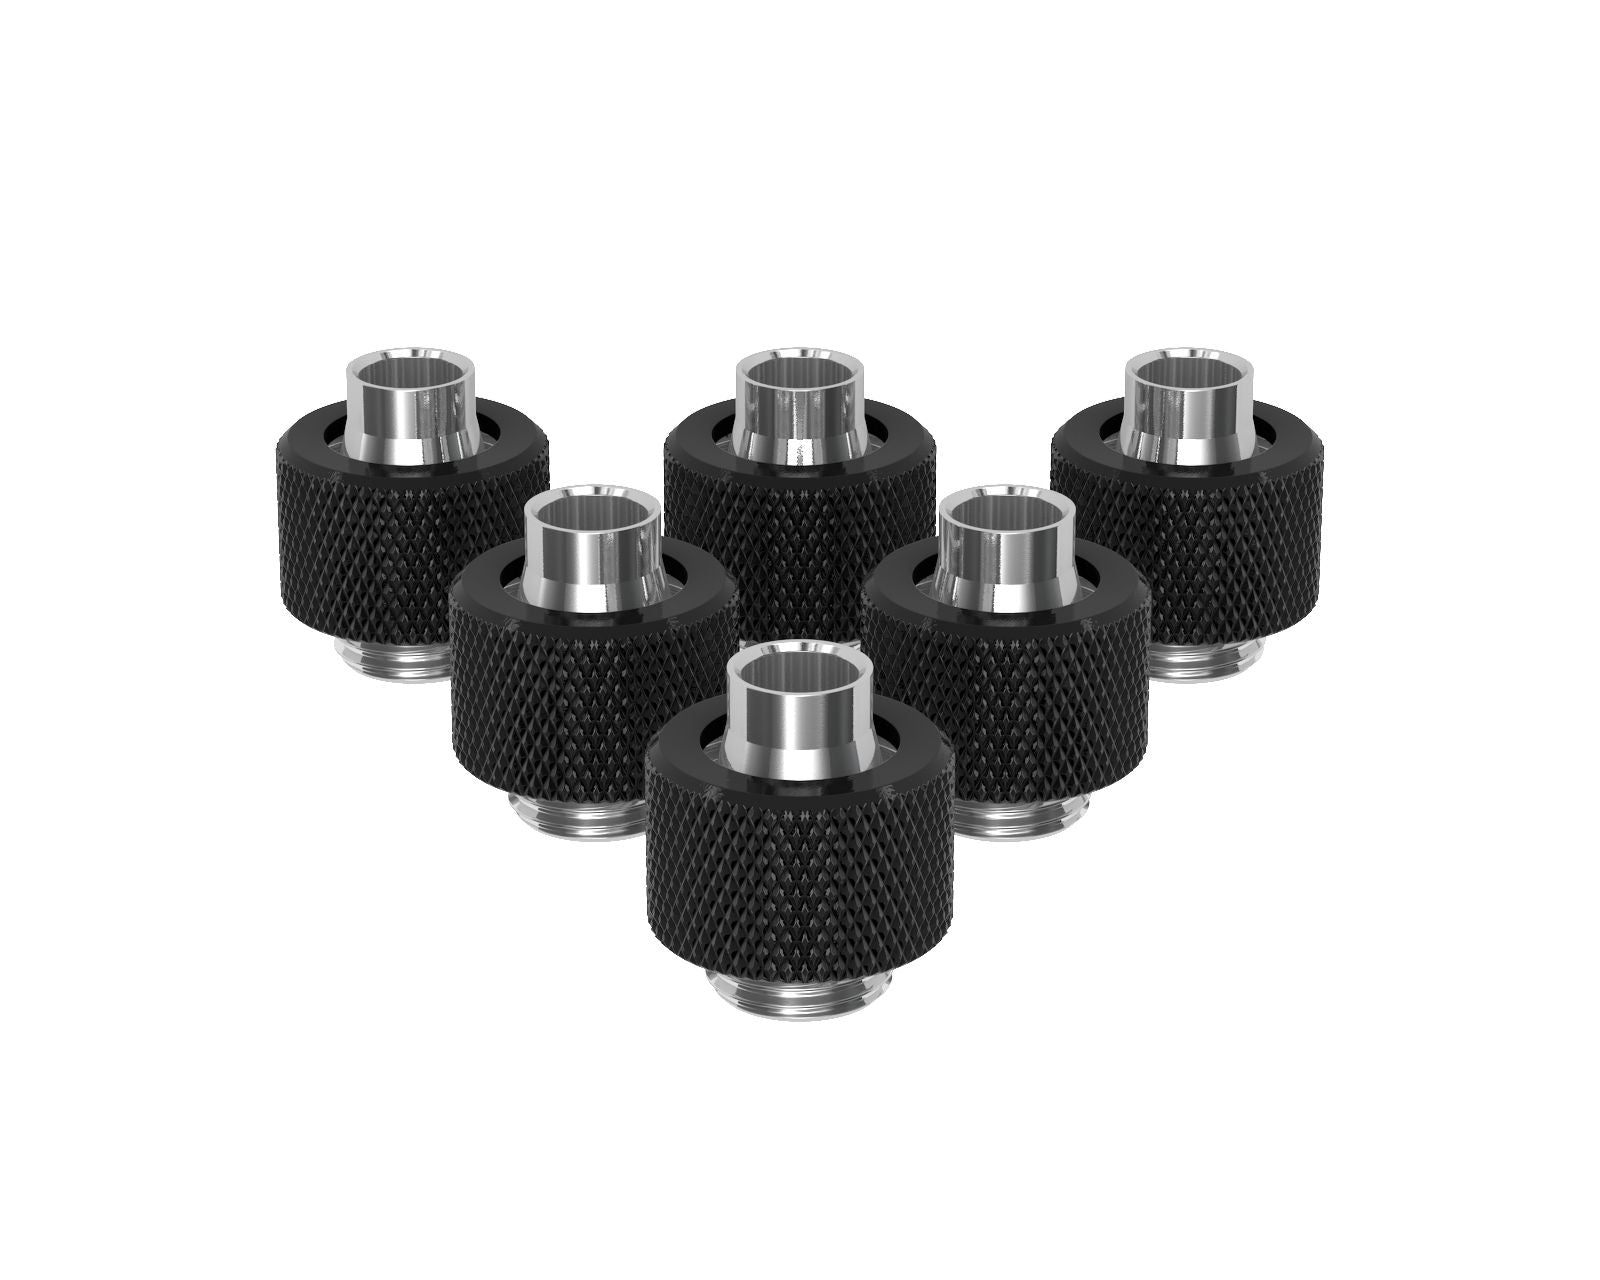 PrimoChill SecureFit SX - Premium Compression Fitting For 3/8in ID x 1/2in OD Flexible Tubing 6 Pack (F-SFSX12-6) - Available in 20+ Colors, Custom Watercooling Loop Ready - Satin Black